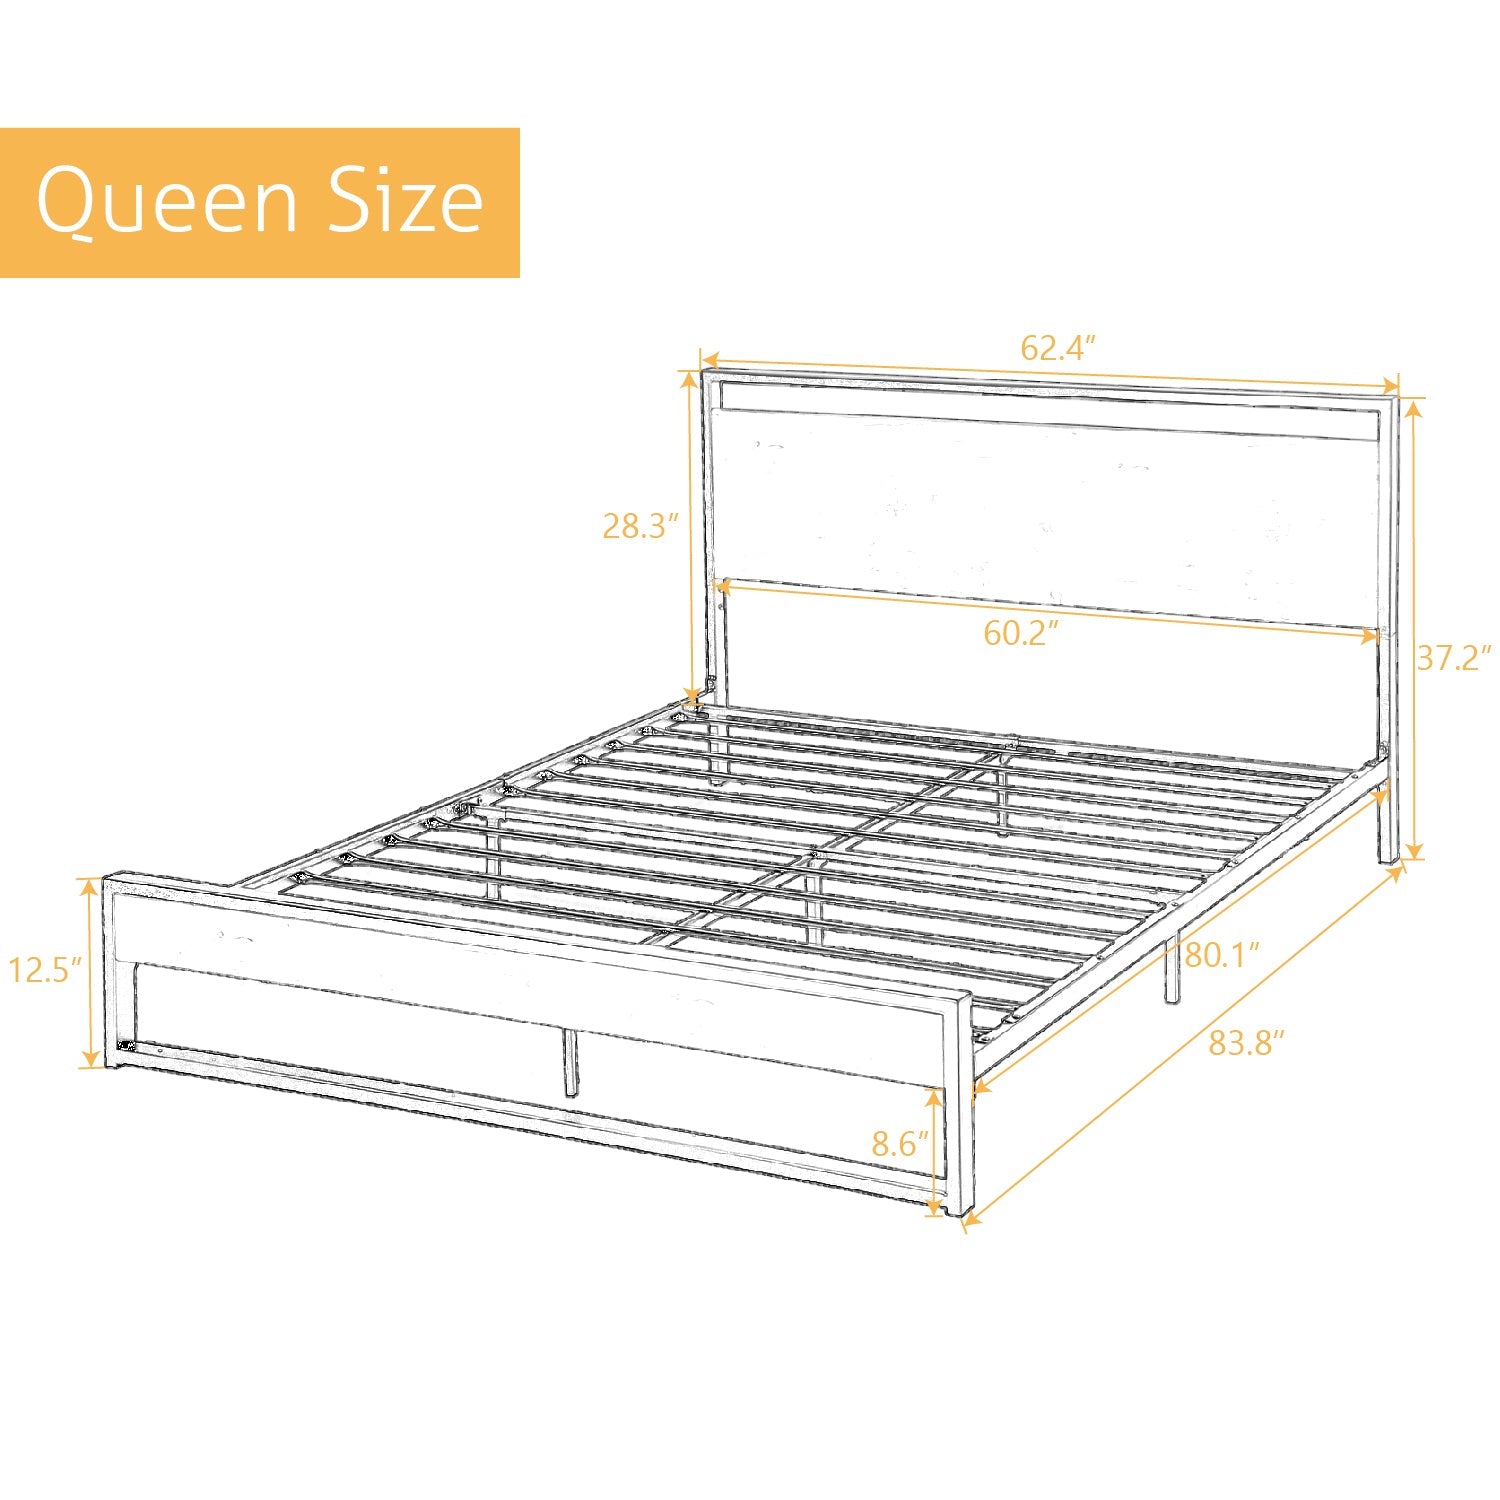 Amolife Queen Platform Bed Frame with Wooden Headboard and 13 Strong Steel Slats Support, Dark Brown